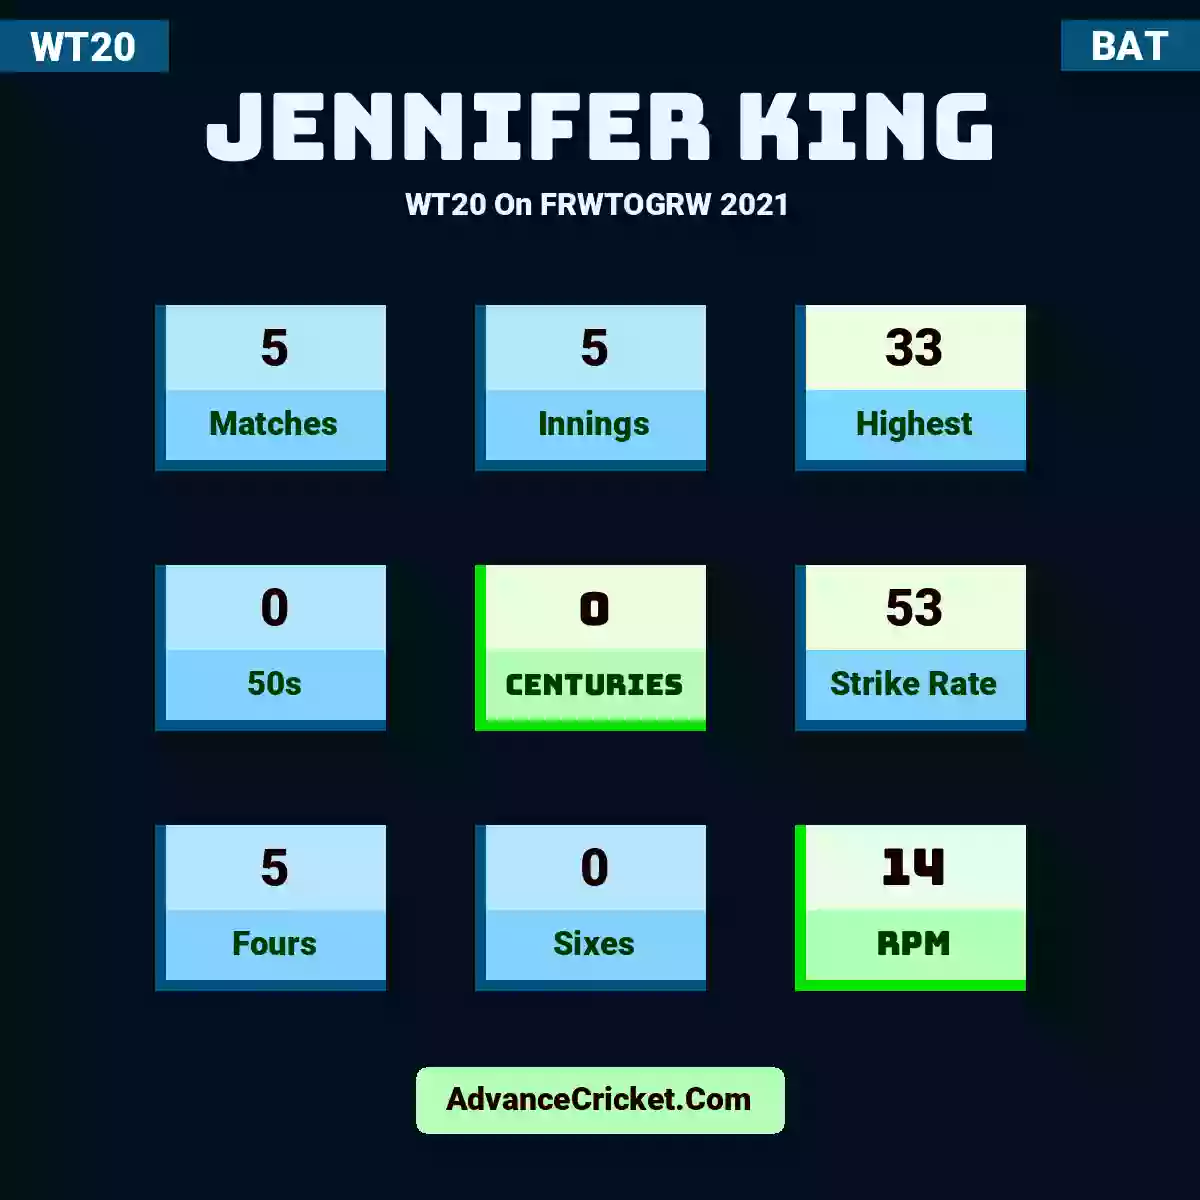 Jennifer King WT20  On FRWTOGRW 2021, Jennifer King played 5 matches, scored 33 runs as highest, 0 half-centuries, and 0 centuries, with a strike rate of 53. J.King hit 5 fours and 0 sixes, with an RPM of 14.